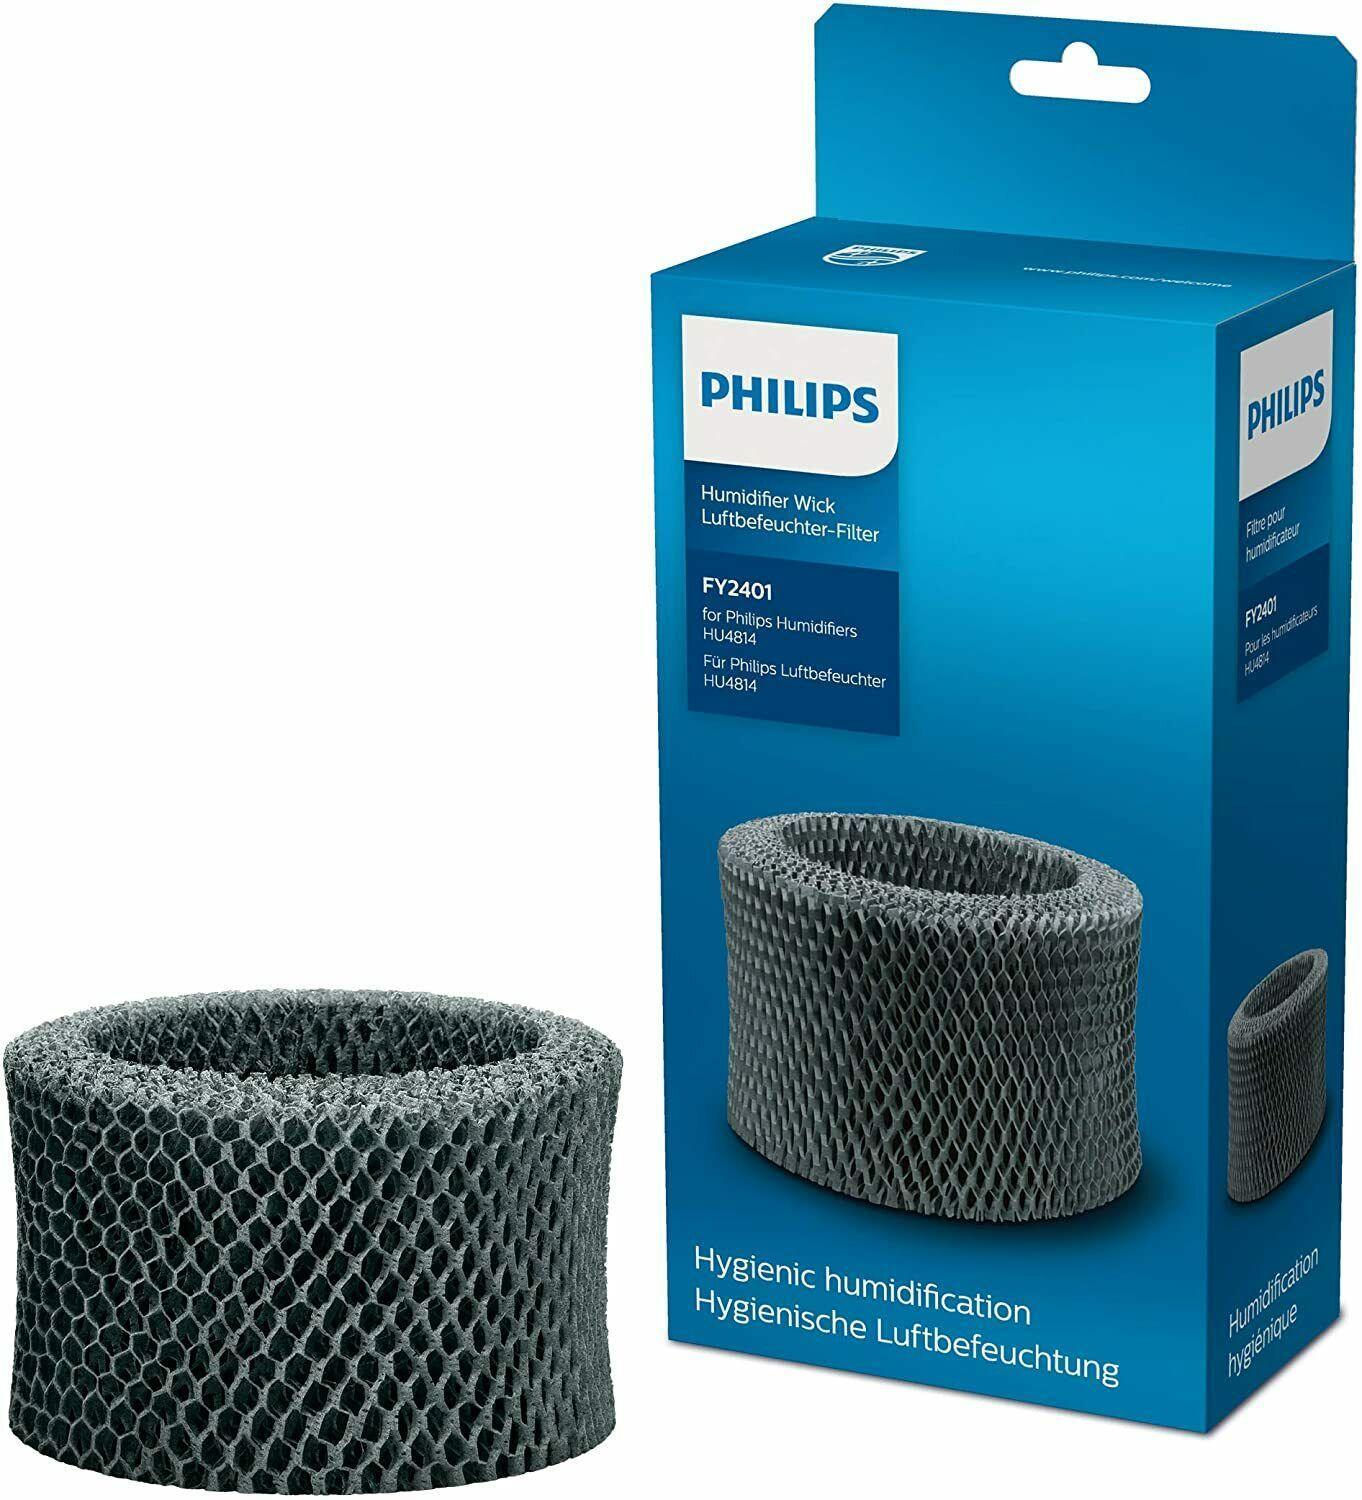 PHILIPS Humidifier Wick Filter Accessories for Philips Air Humidifier Home Care